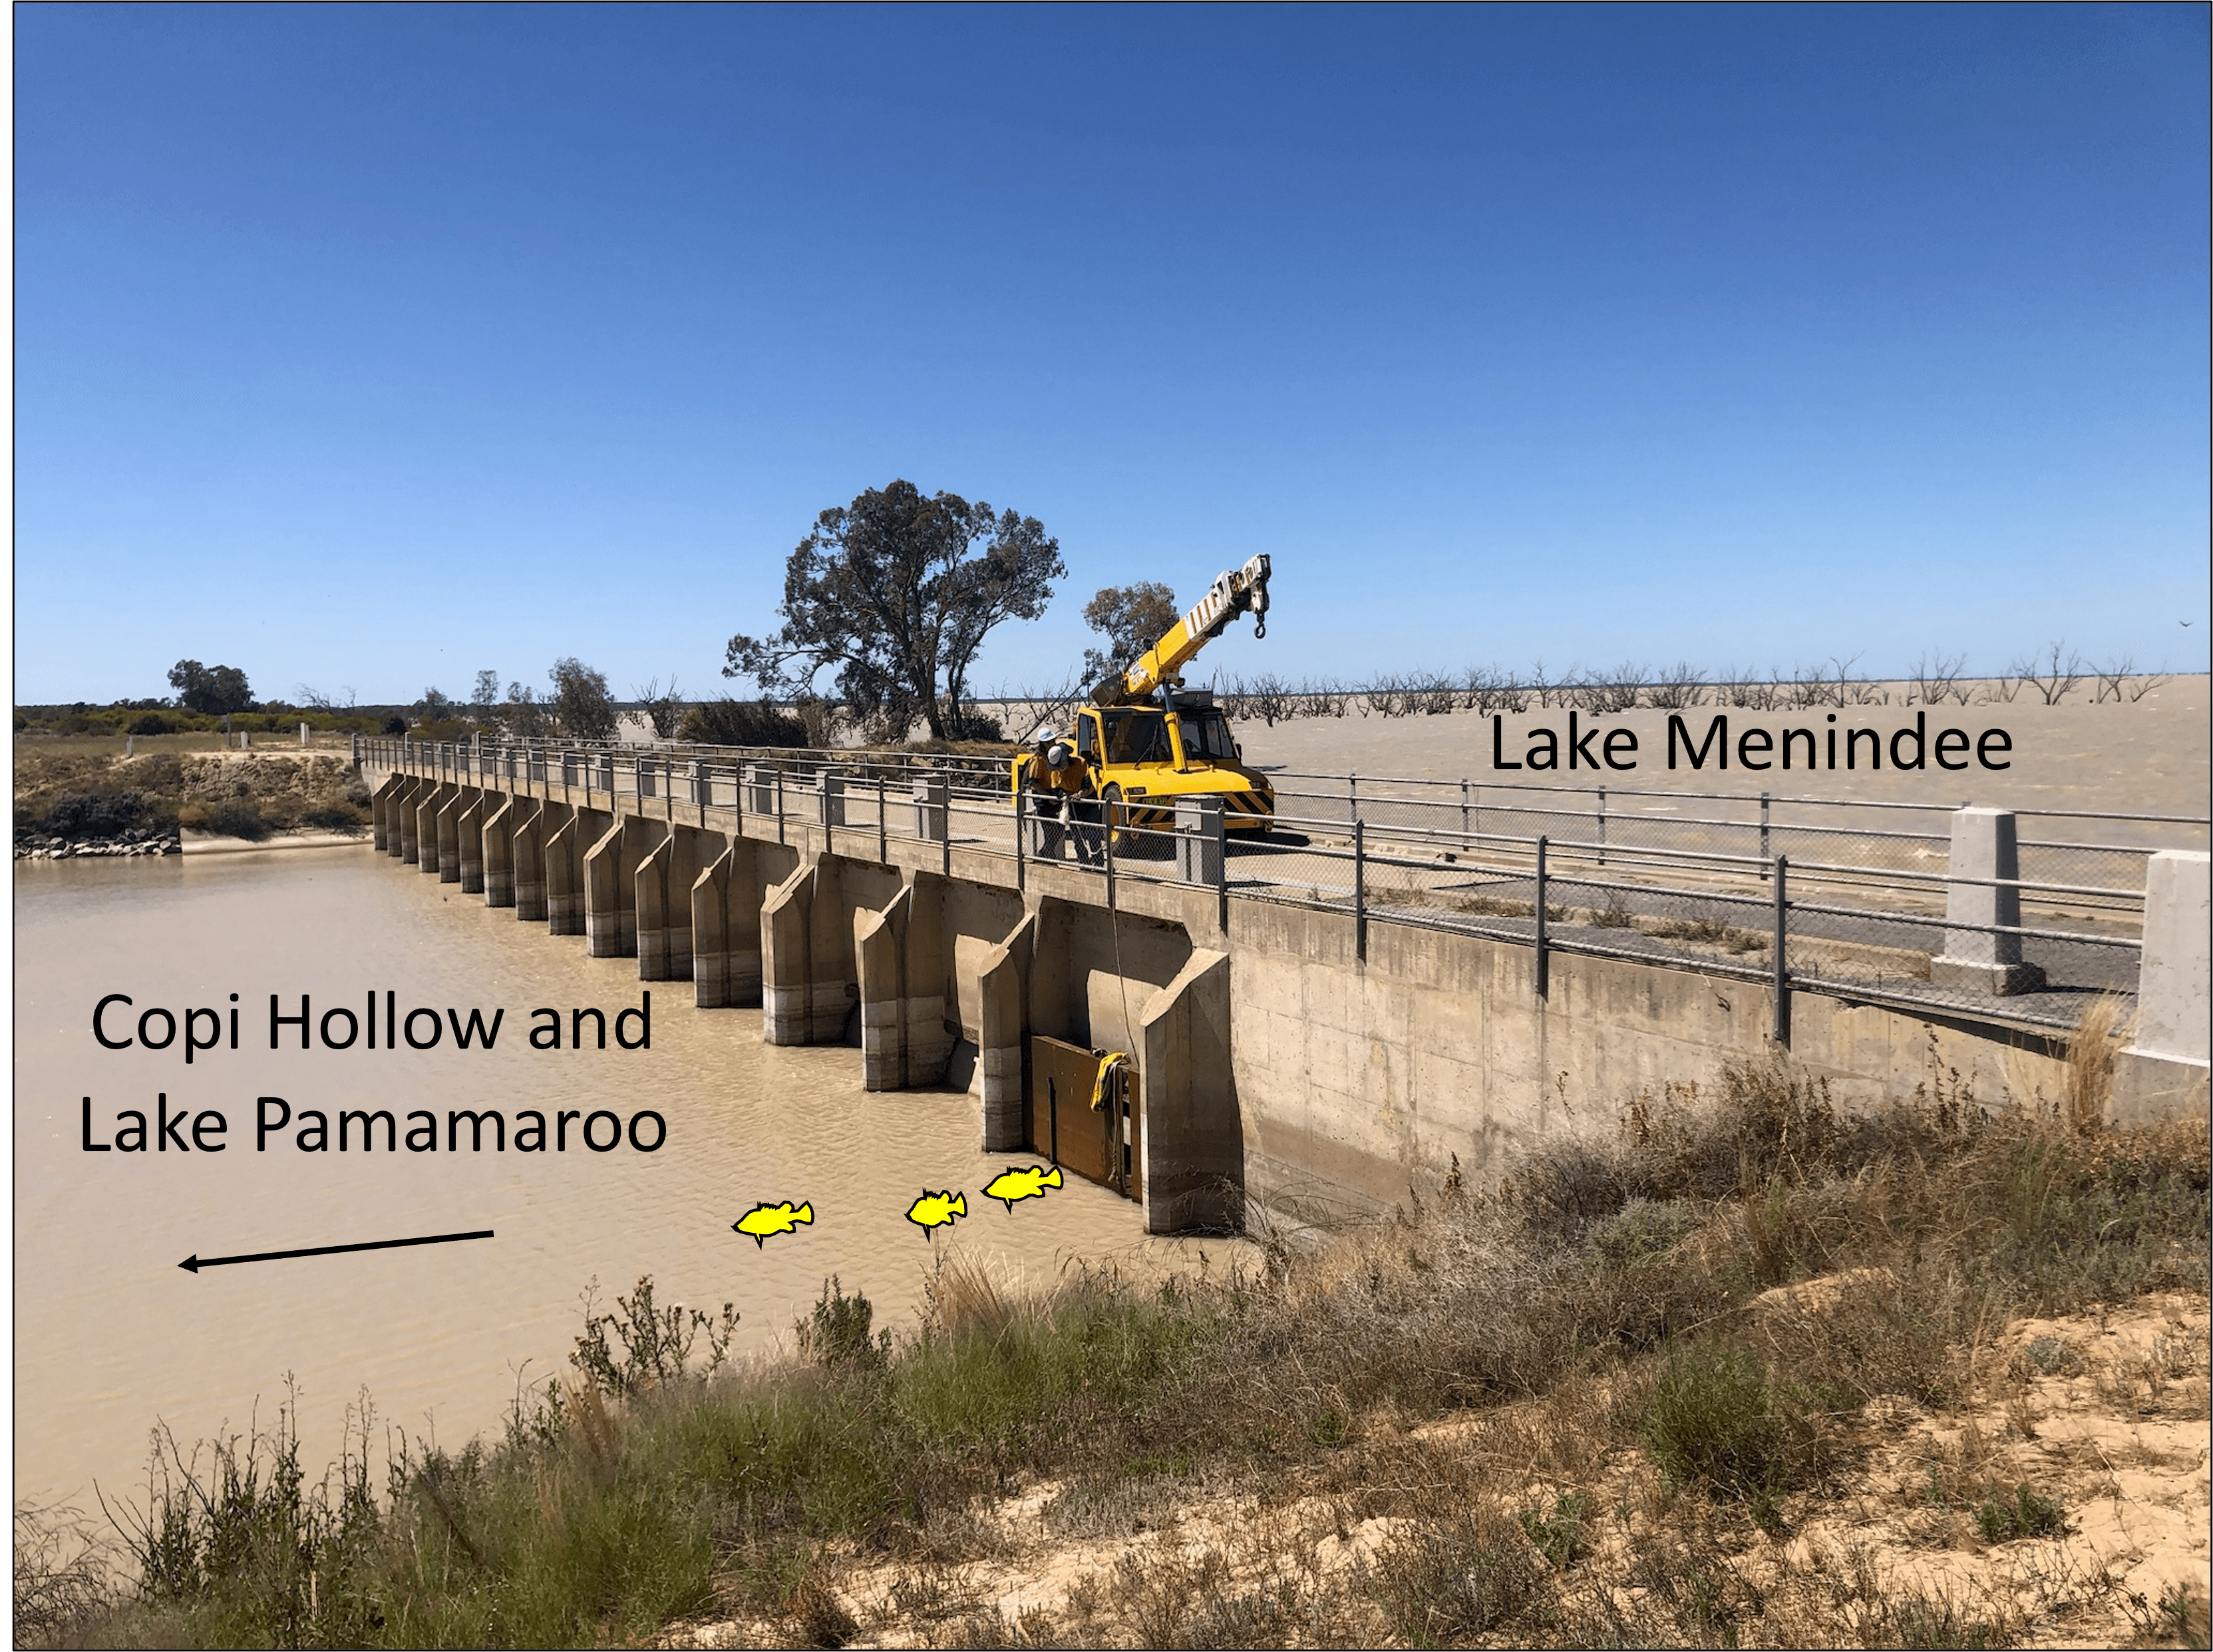 A temporary fish ladder (vertical slot baffles) in one gate of the Lake Menindee inlet regulator in December 2022 to facilitate passage upstream through the regulator from Lake Menindee to Copi Hollow and Lake Pamamaroo. (Credit: NSW DPI Fisheries, WaterNSW).